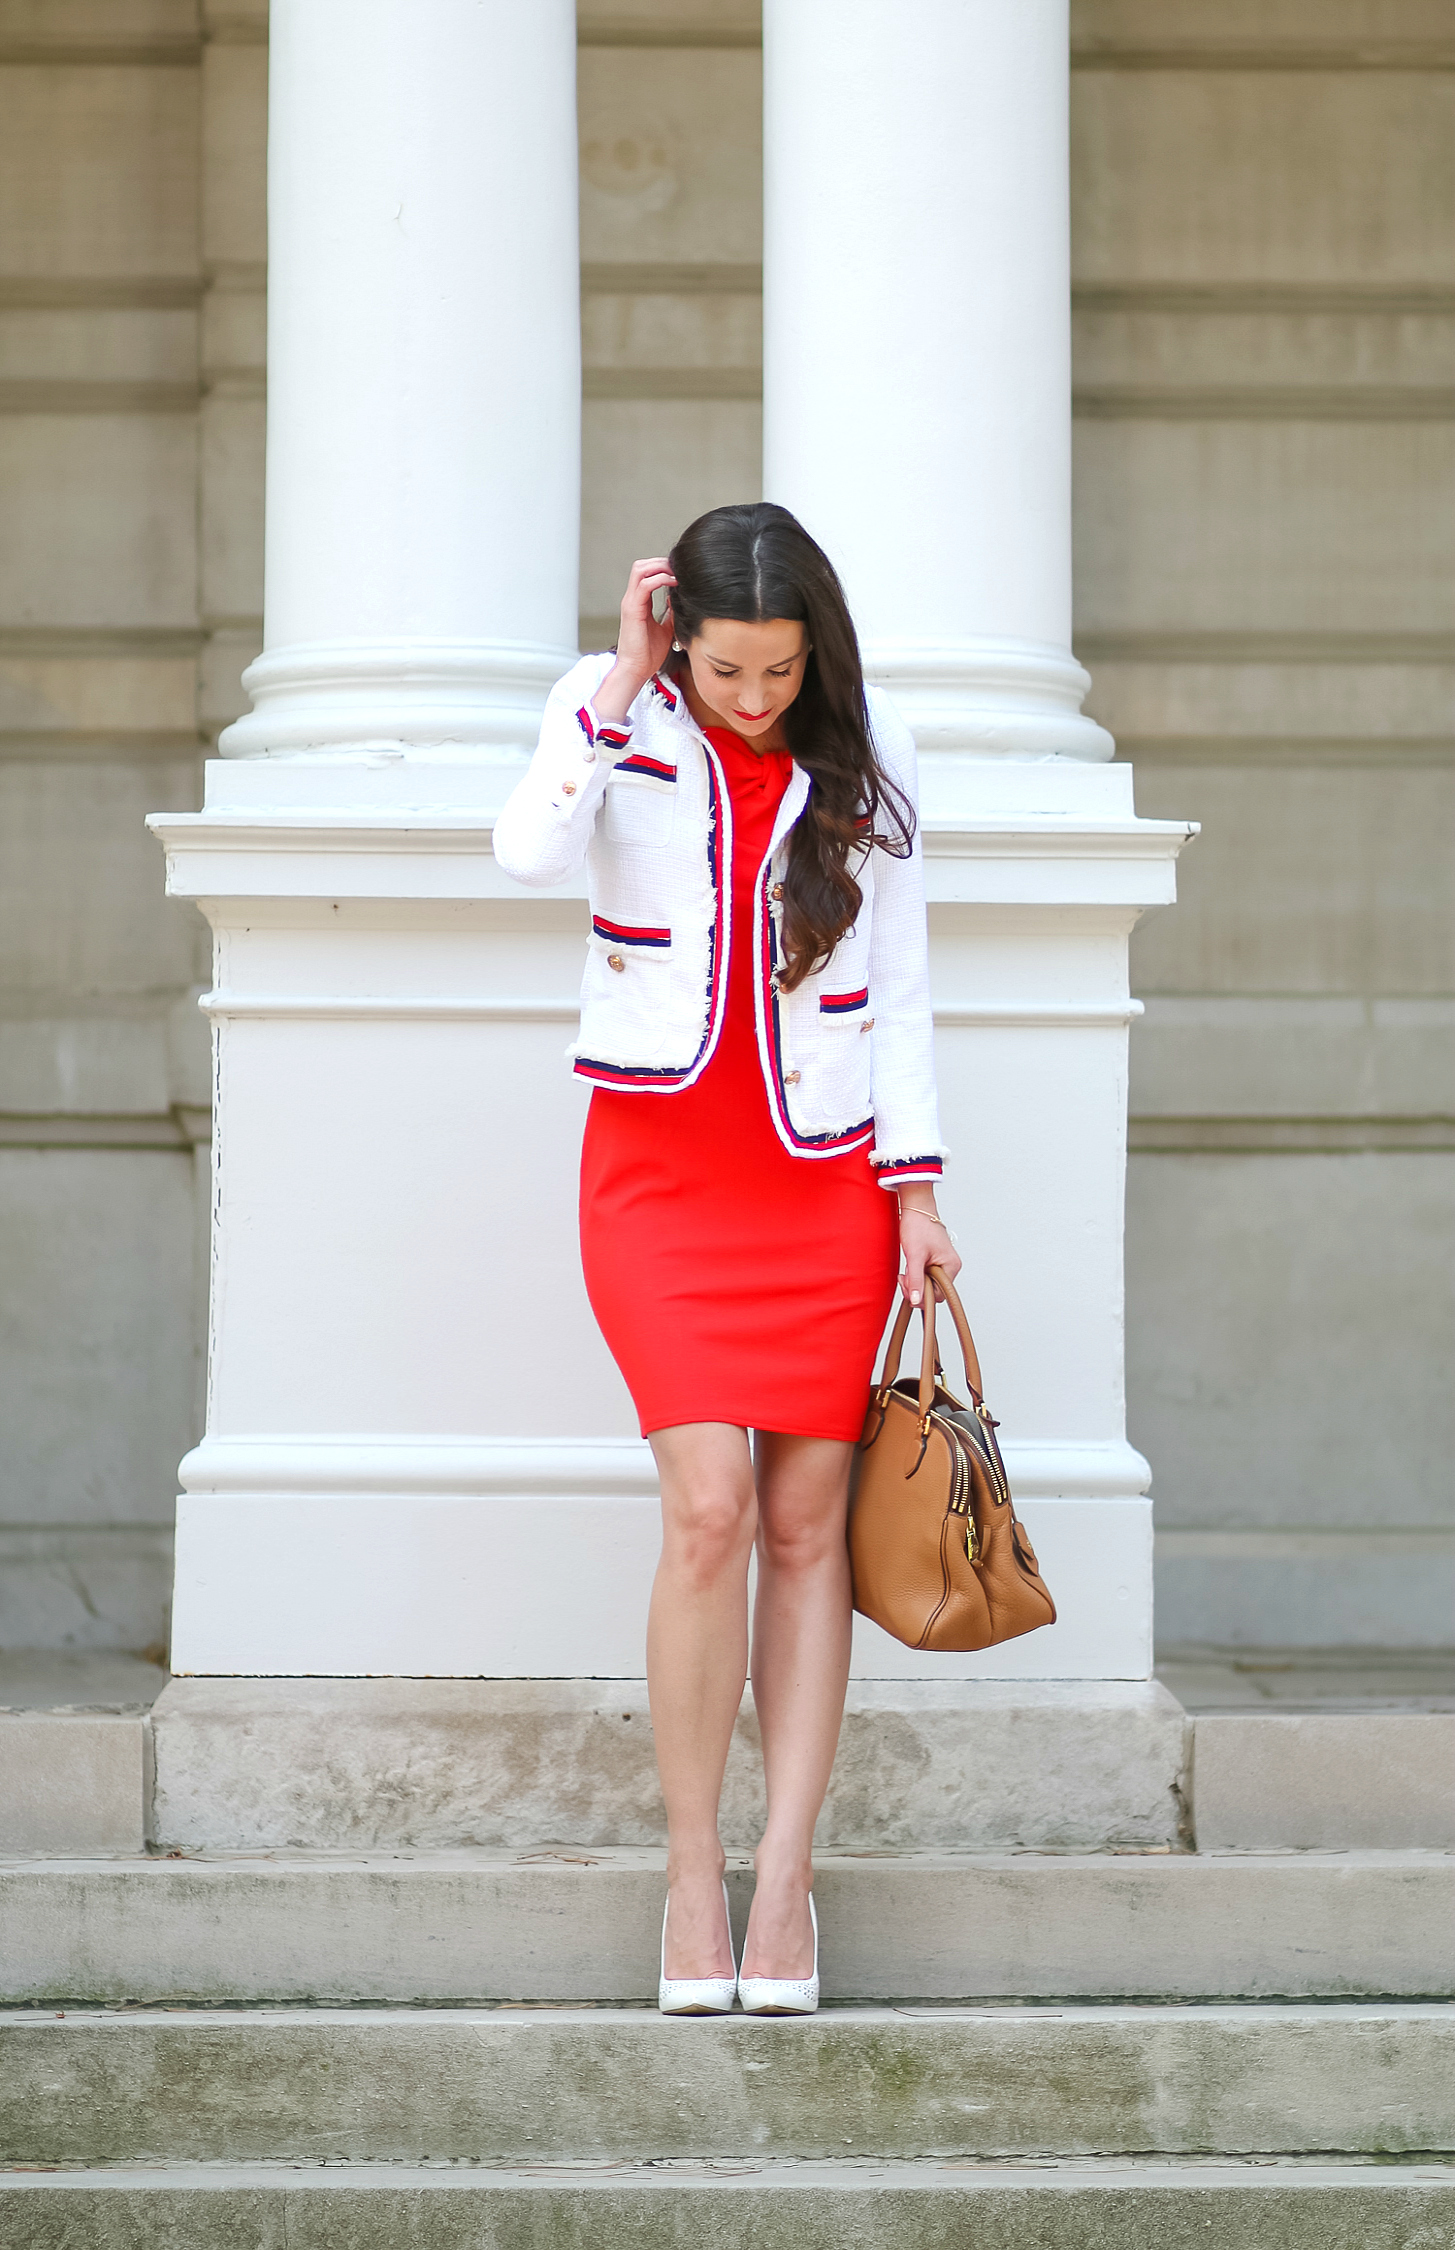 Red Jackie O sheath dress and white tweed jacket | Dressy casual Labor Day outfit idea by fashion blogger Stephanie Ziajka from Diary of a Debutante